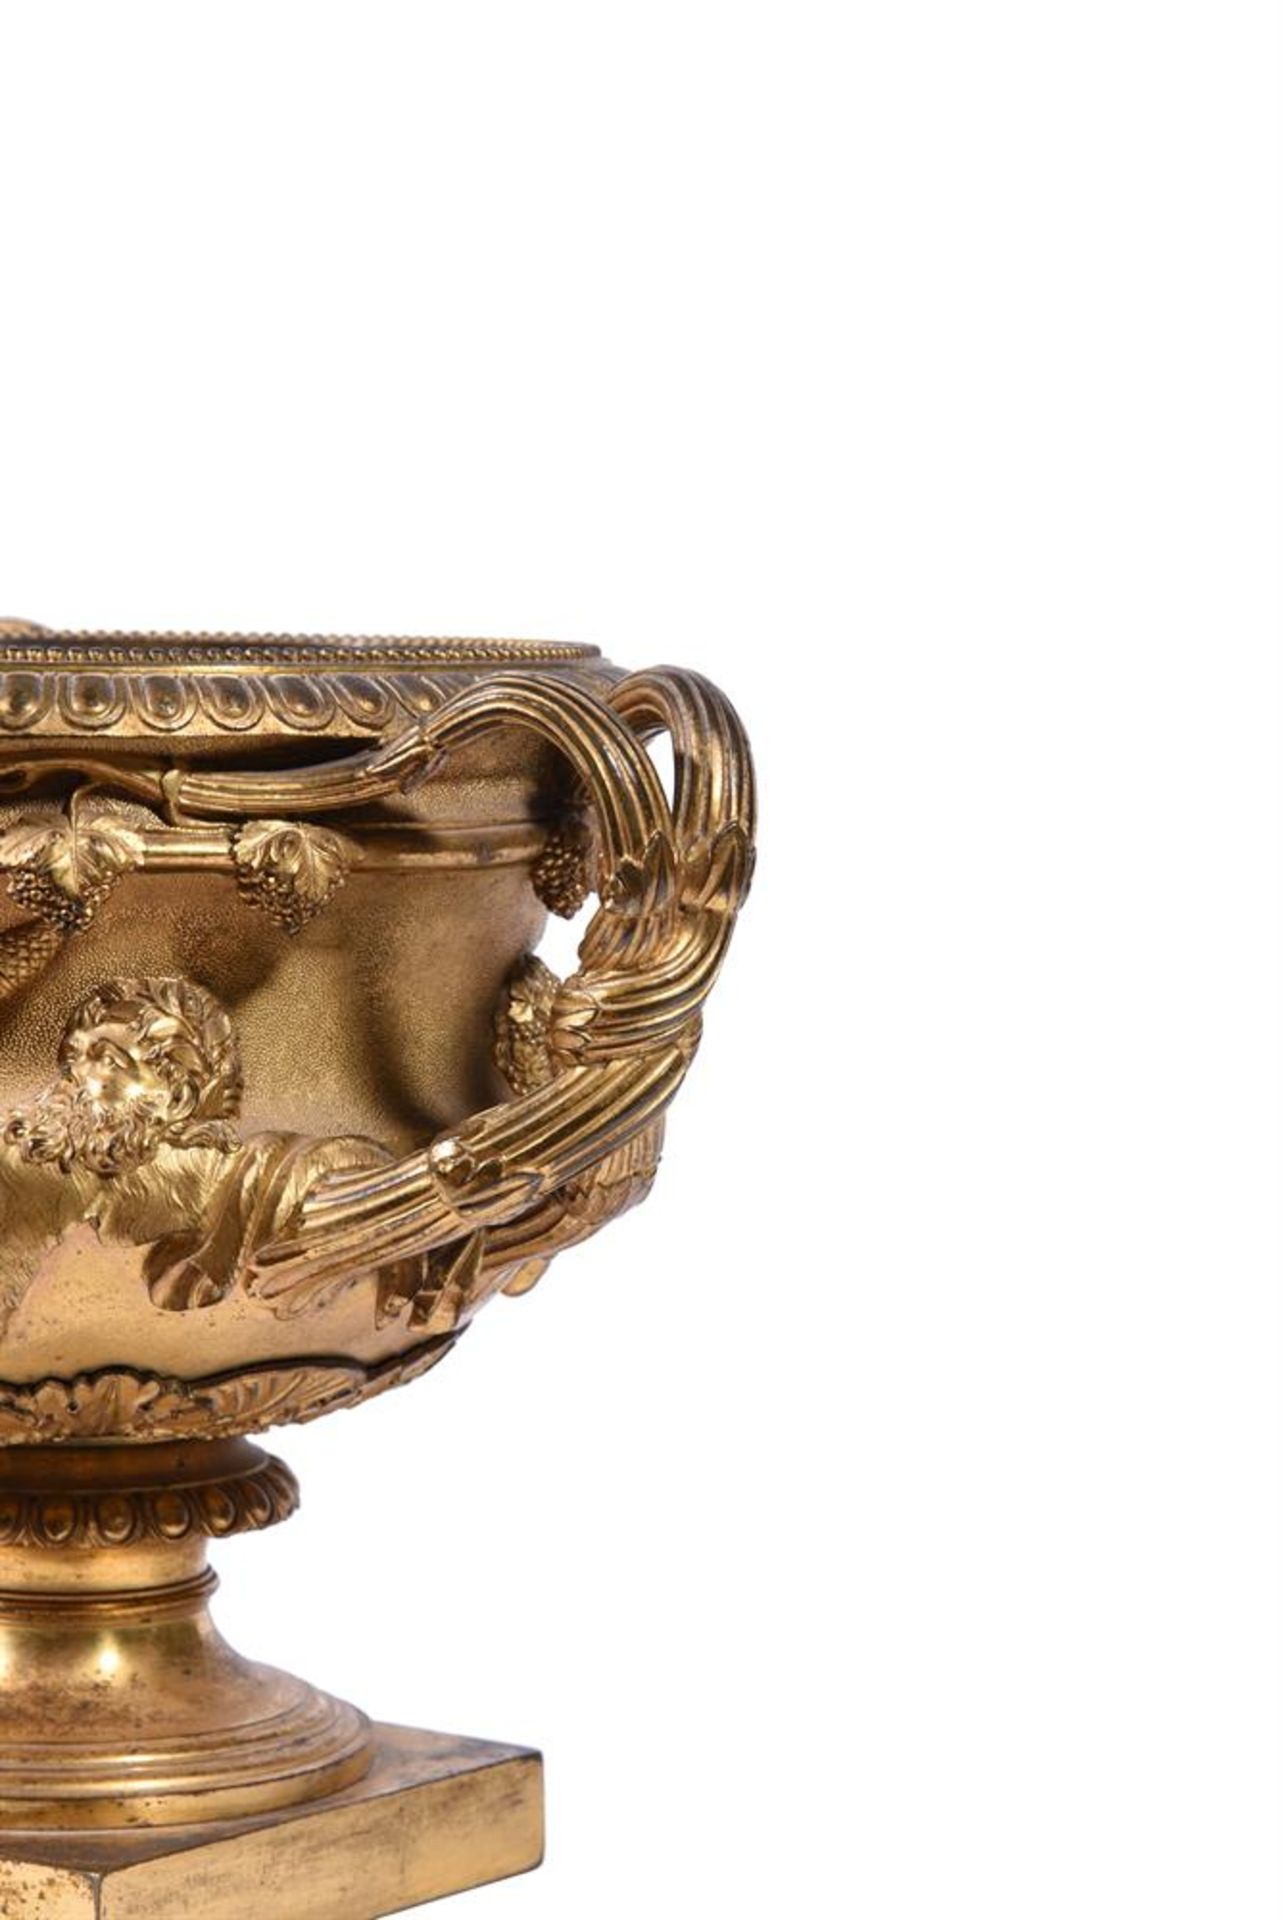 AFTER THE ANTIQUE, A PAIR OF REGENCY ORMOLU WARWICK VASES, EARLY 19TH CENTURY - Image 4 of 4